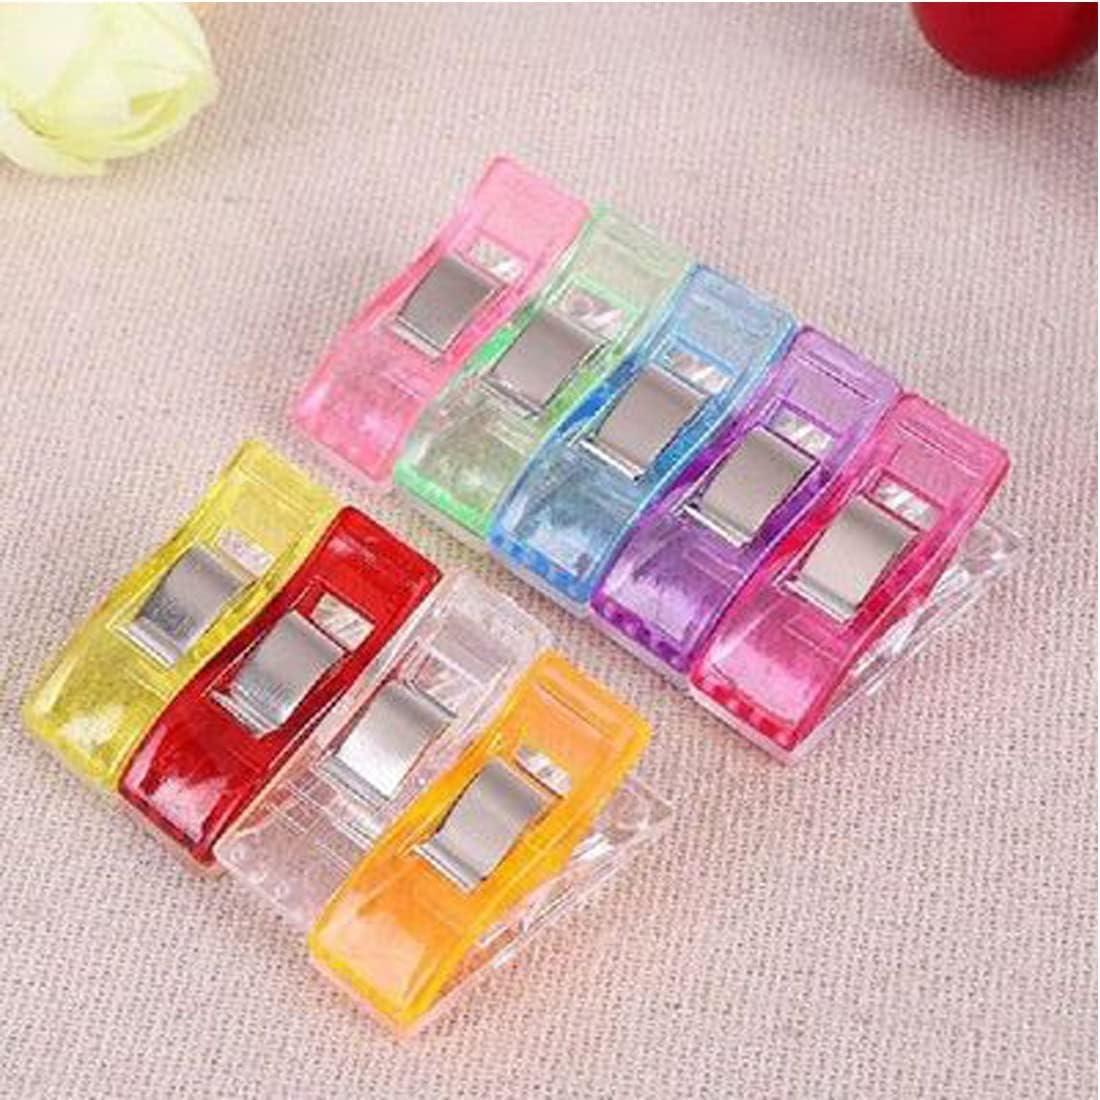 Otylzto Premium Plastic Clips, 100 Pcs with Box, Sewing Notions for Sewing  Quilting Supplies Crafting Tools, Assorted Colors for Craft